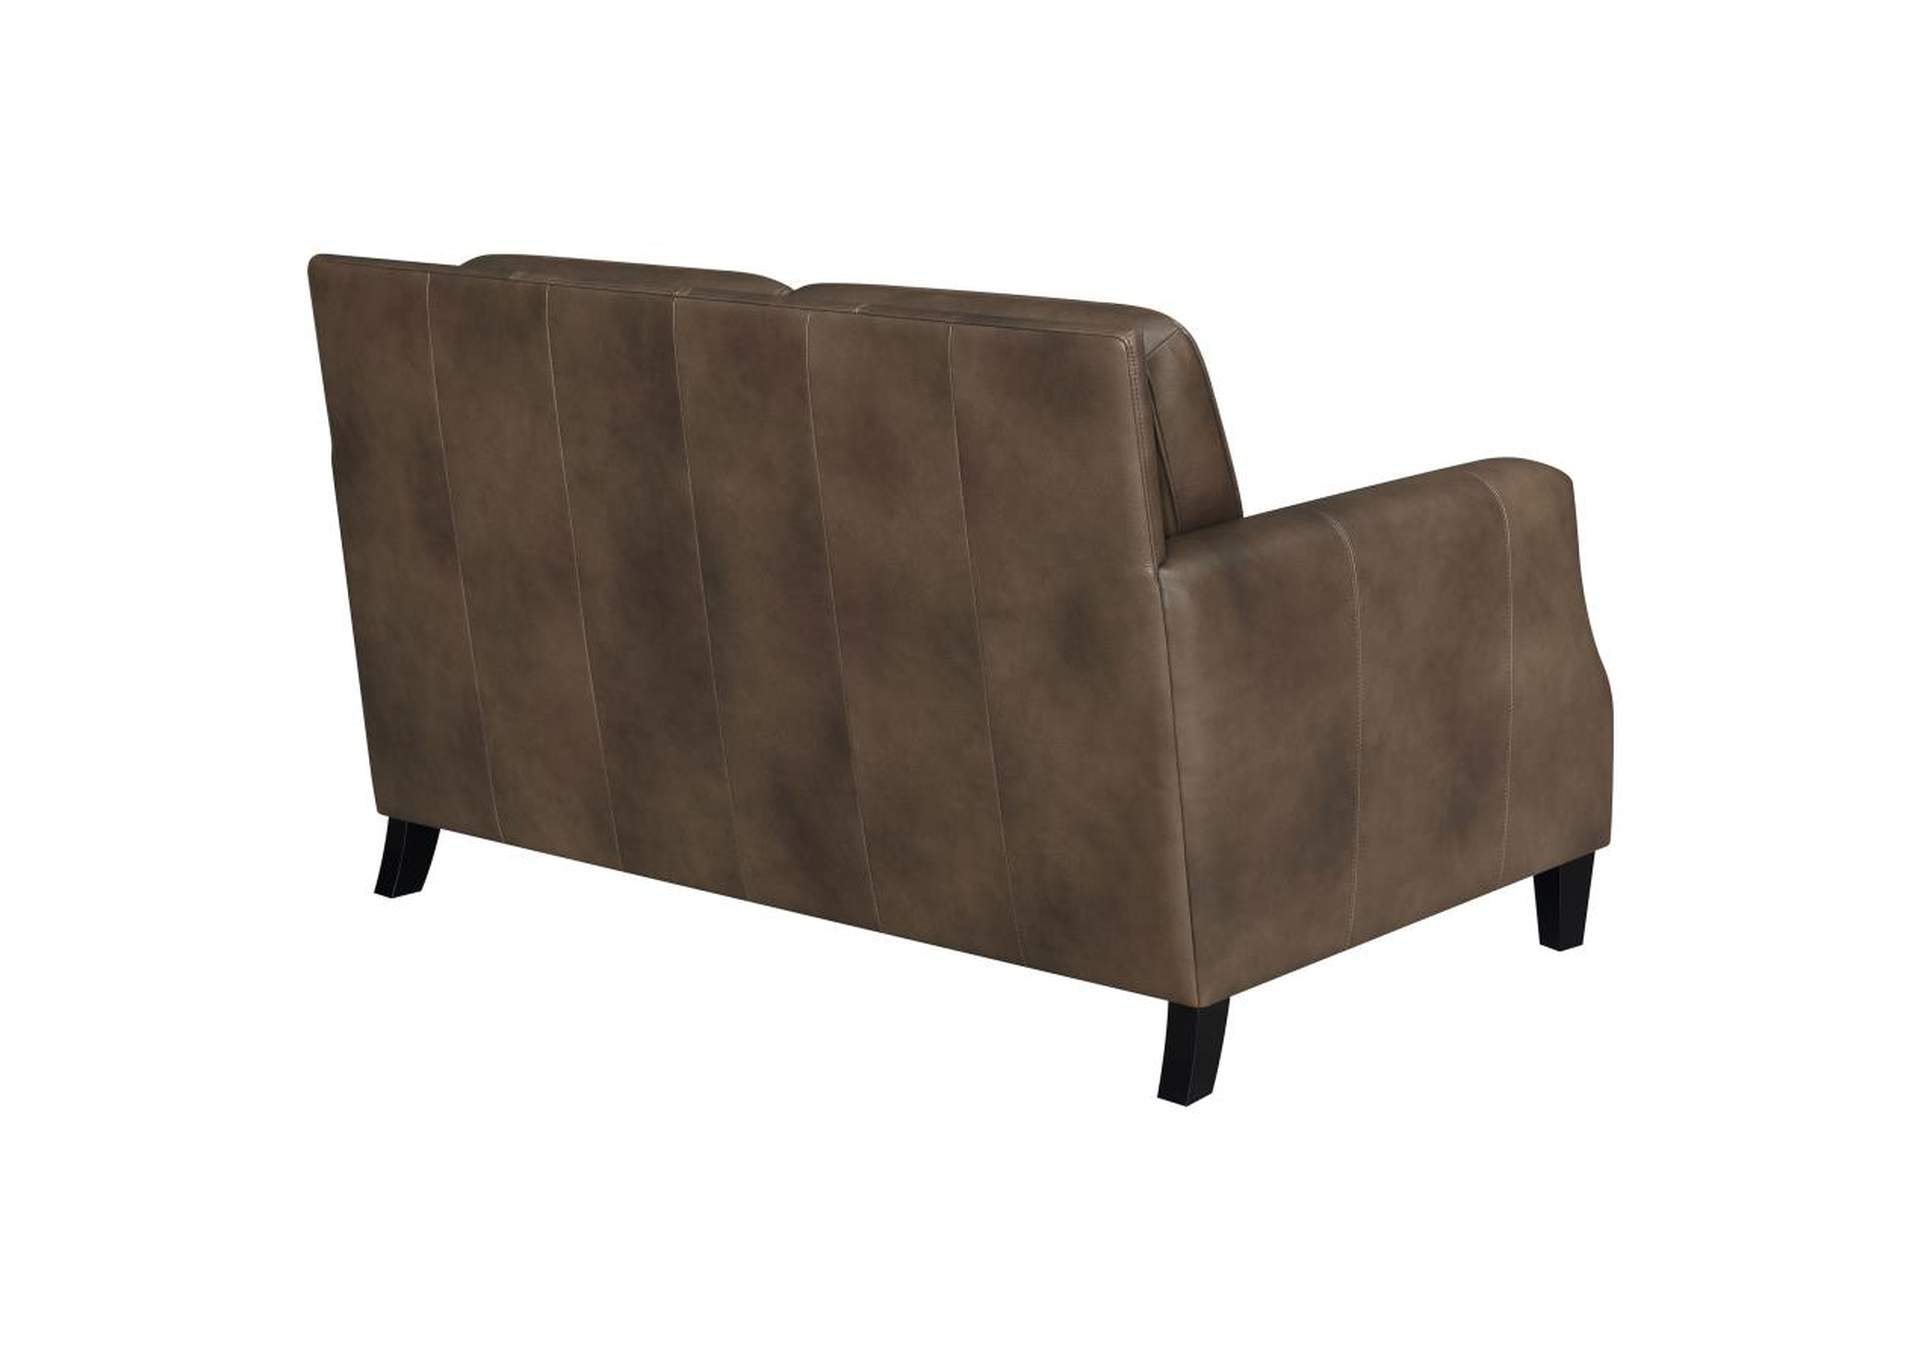 Leaton Upholstered Recessed Arms Loveseat Brown Sugar,Coaster Furniture